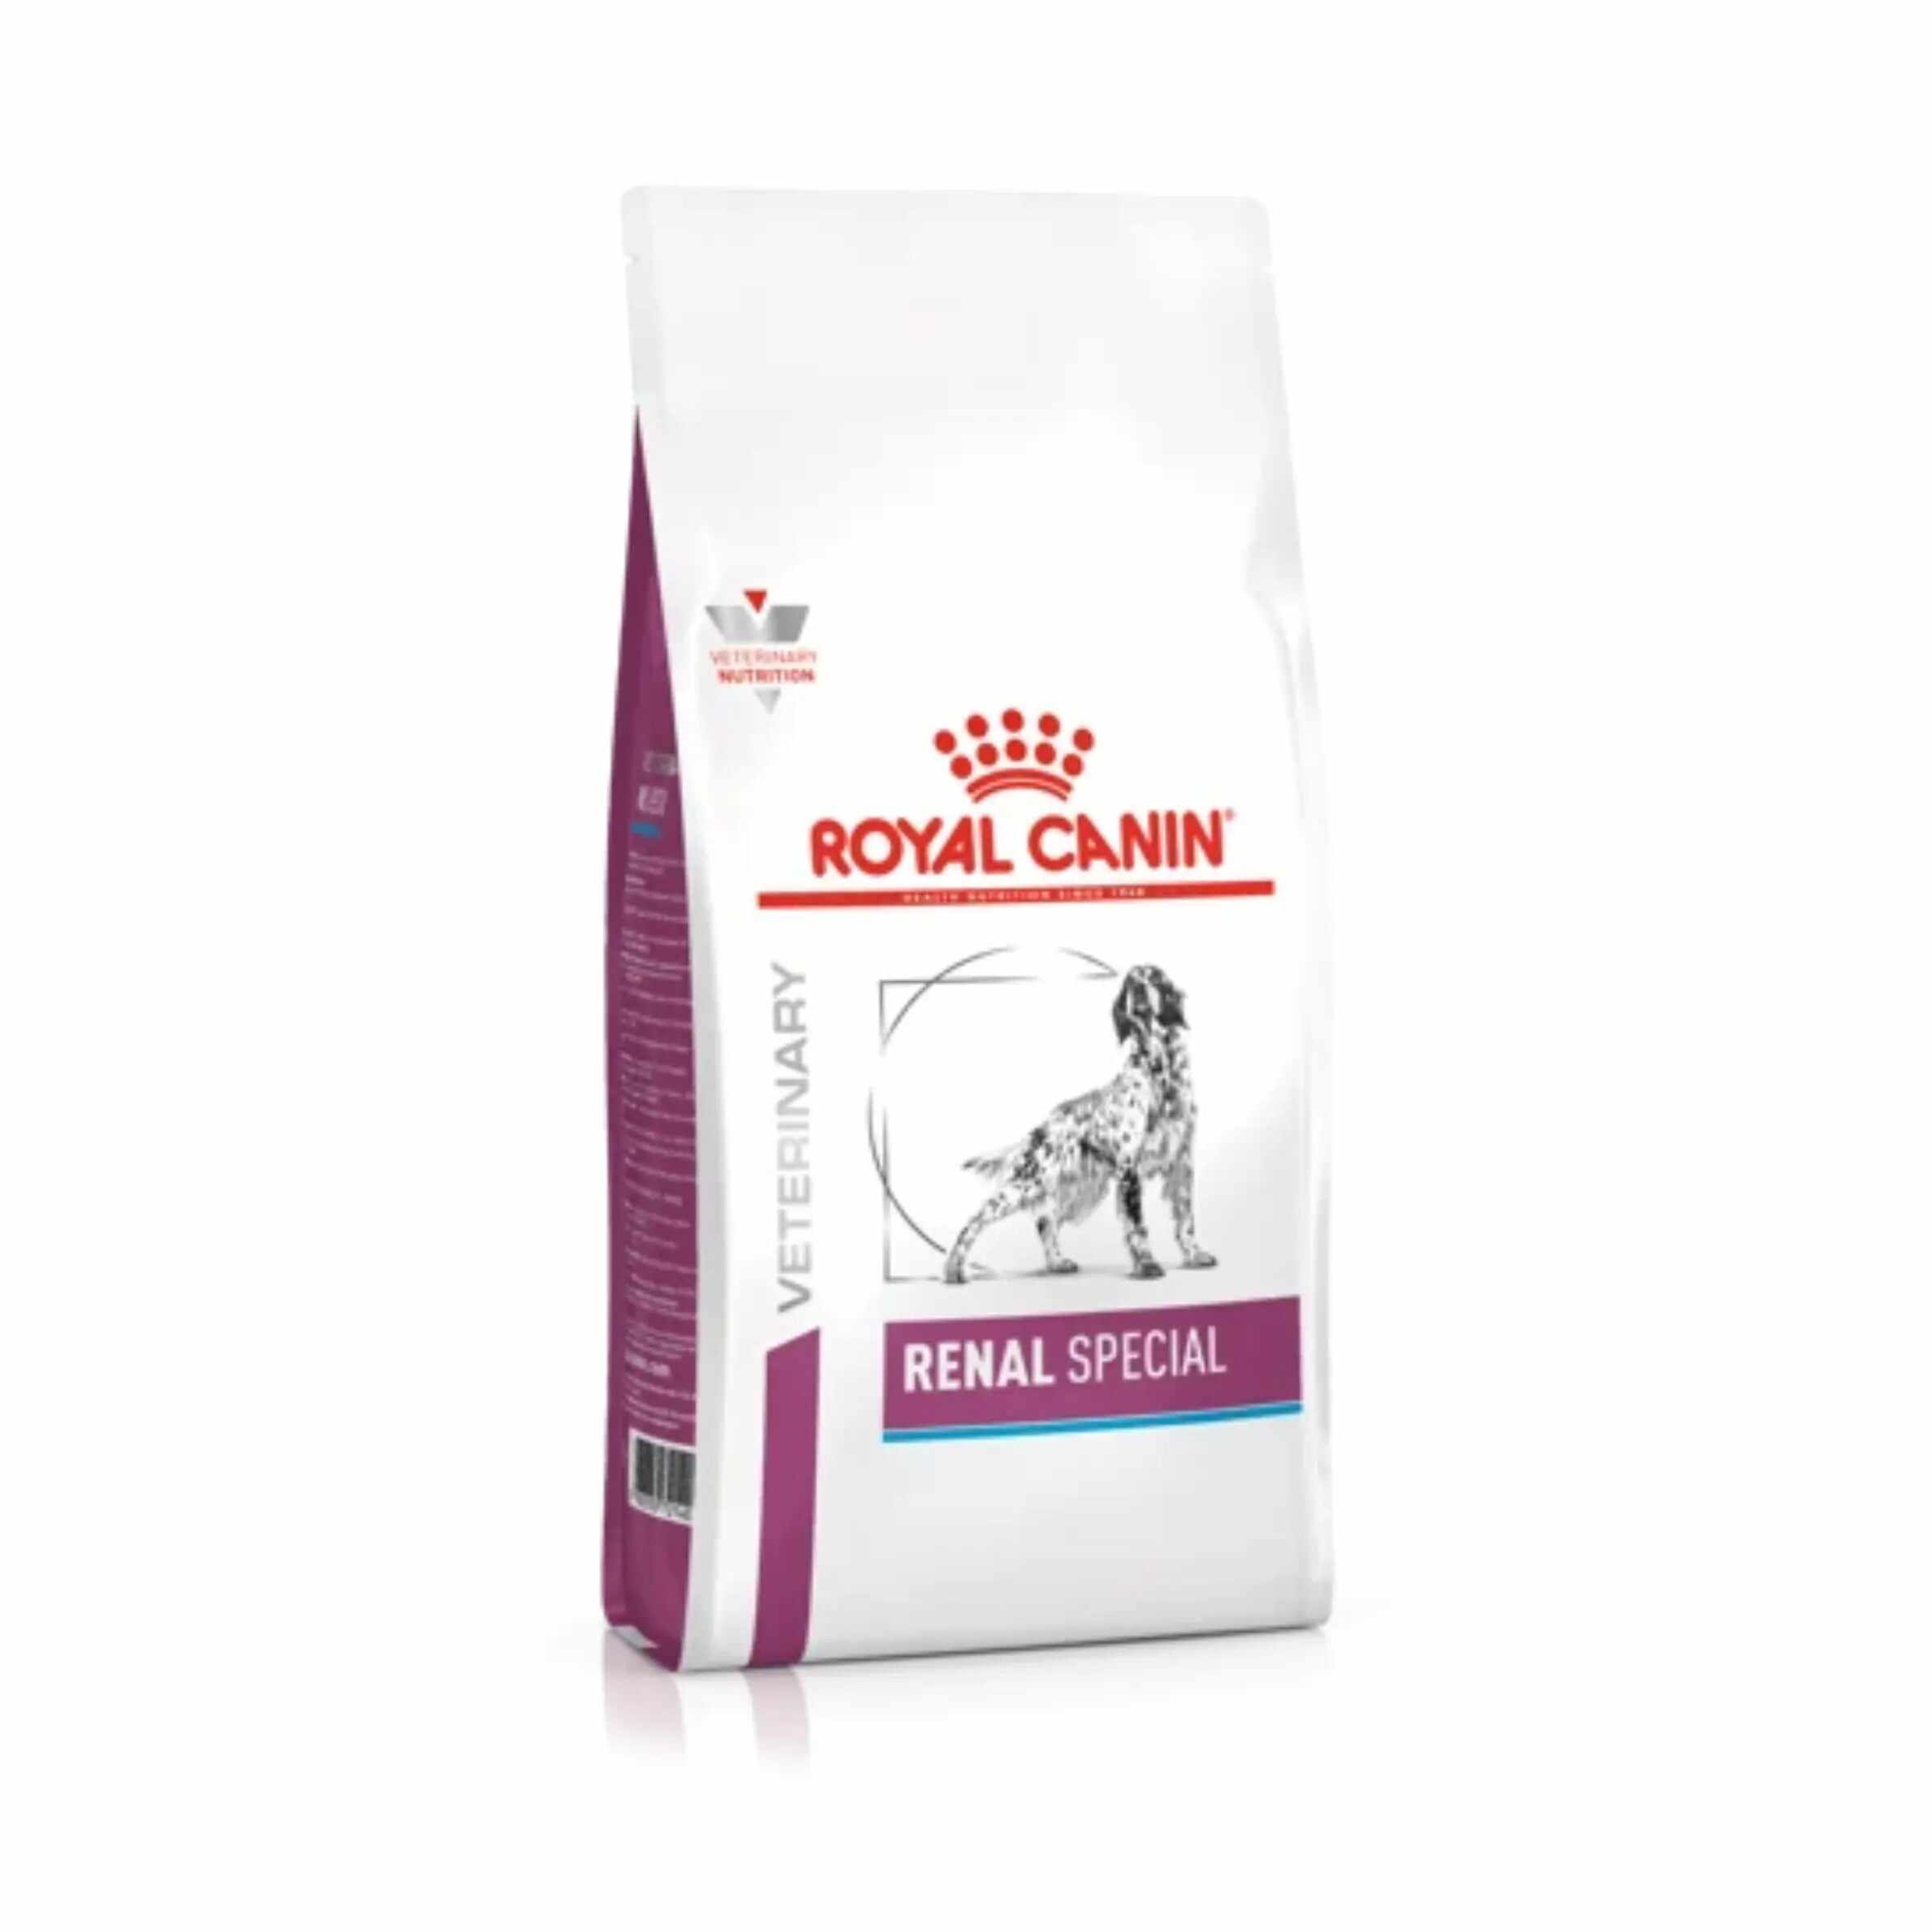 Royal Canin - Canine Renal Special 2kg